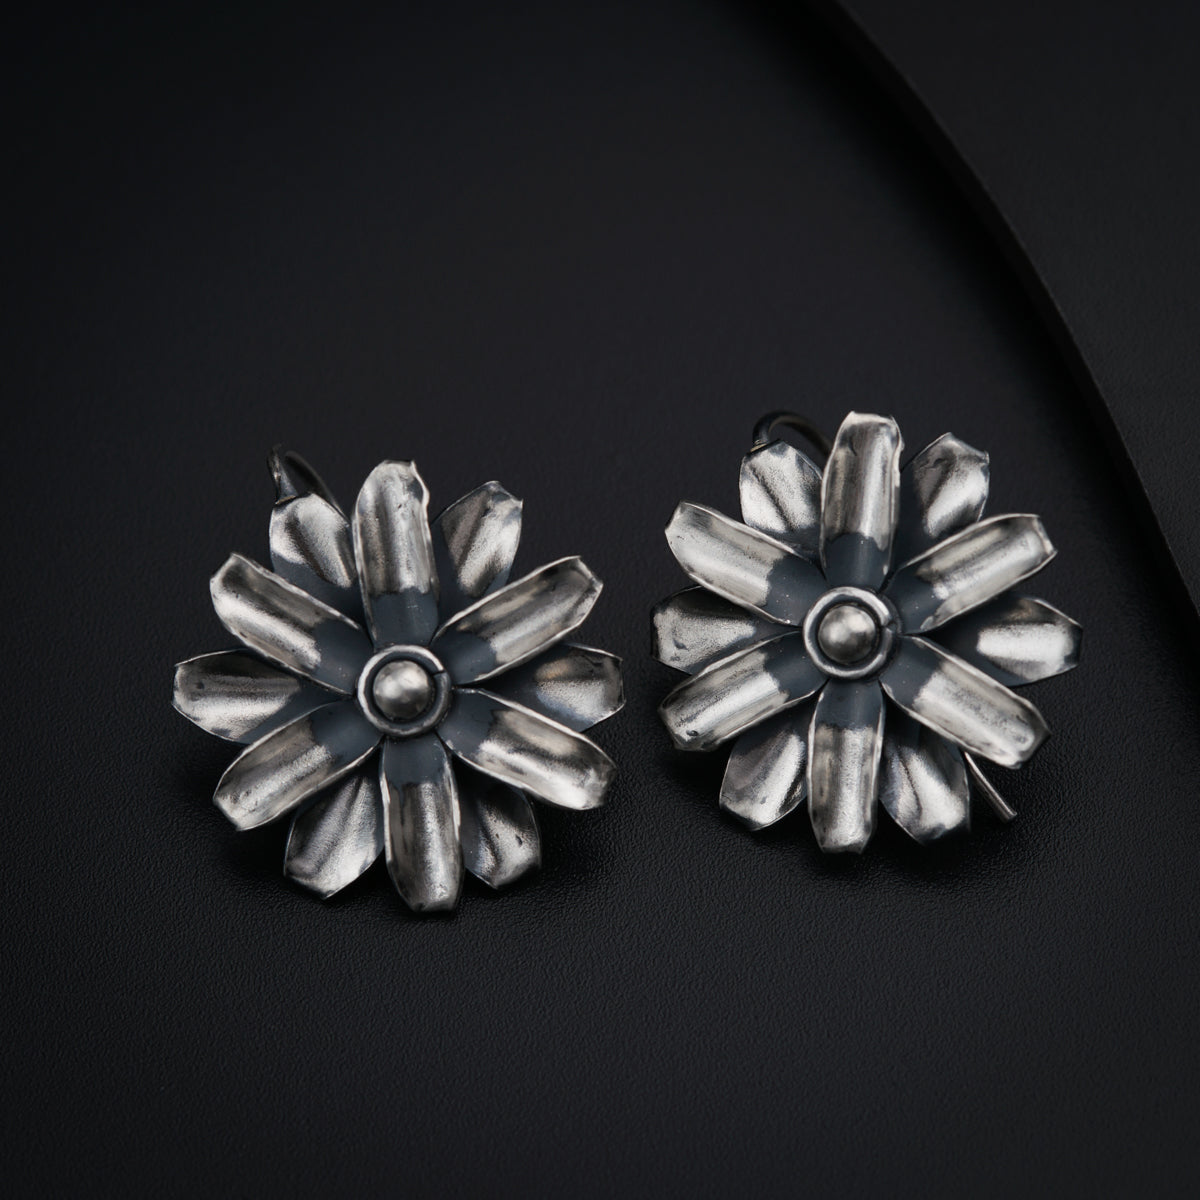 a pair of silver flower shaped earrings on a black surface